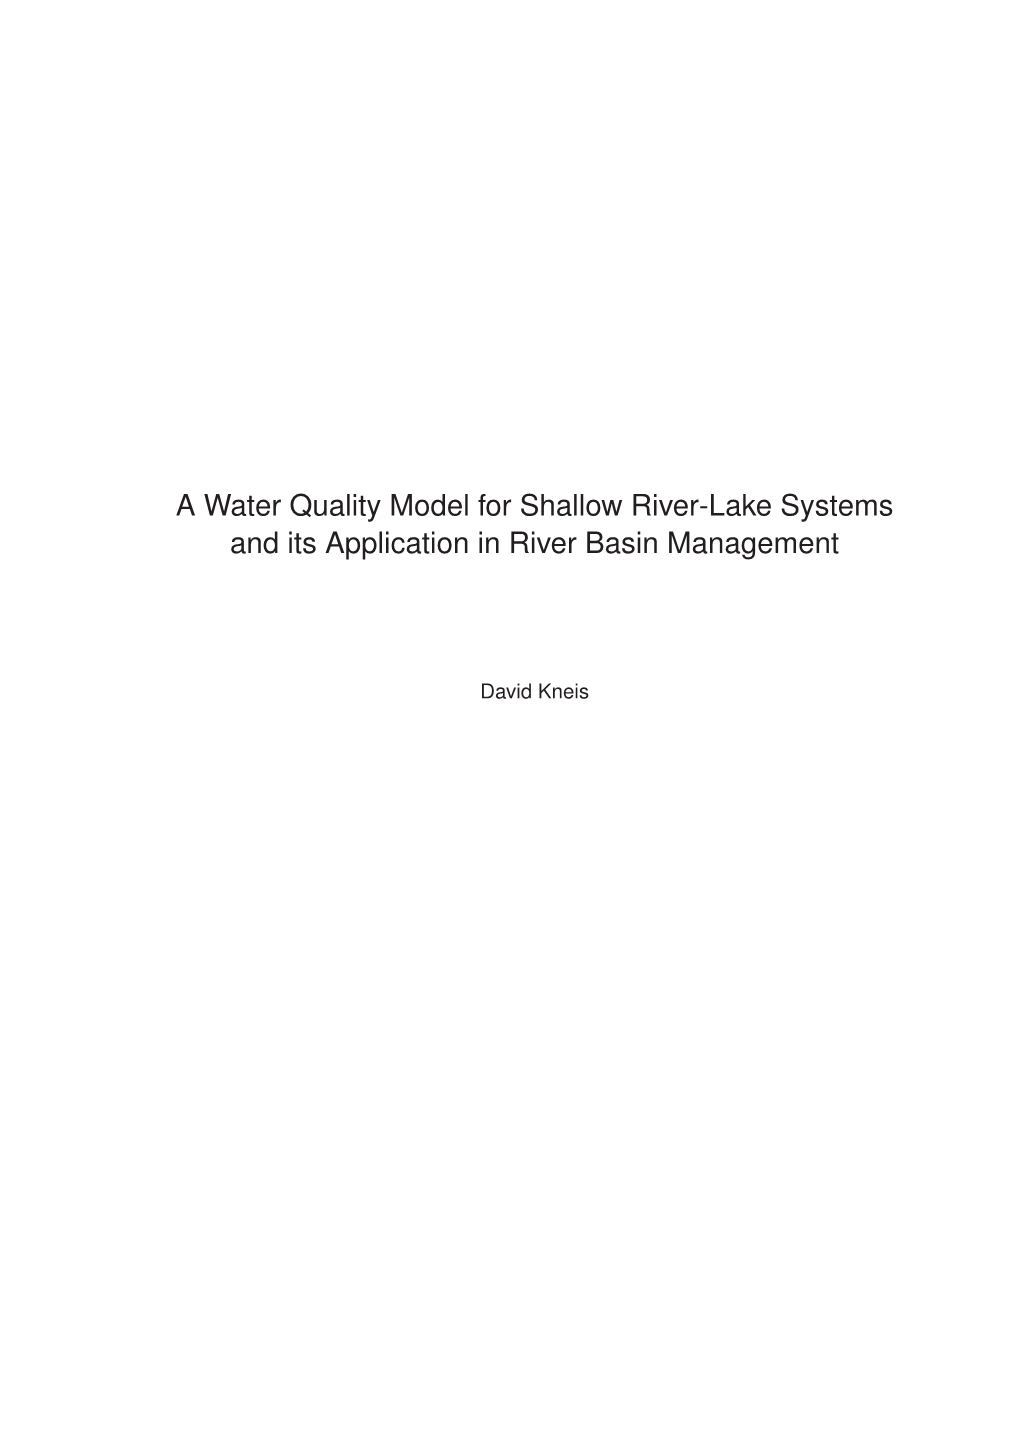 A Water Quality Model for Shallow River-Lake Systems and Its Application in River Basin Management